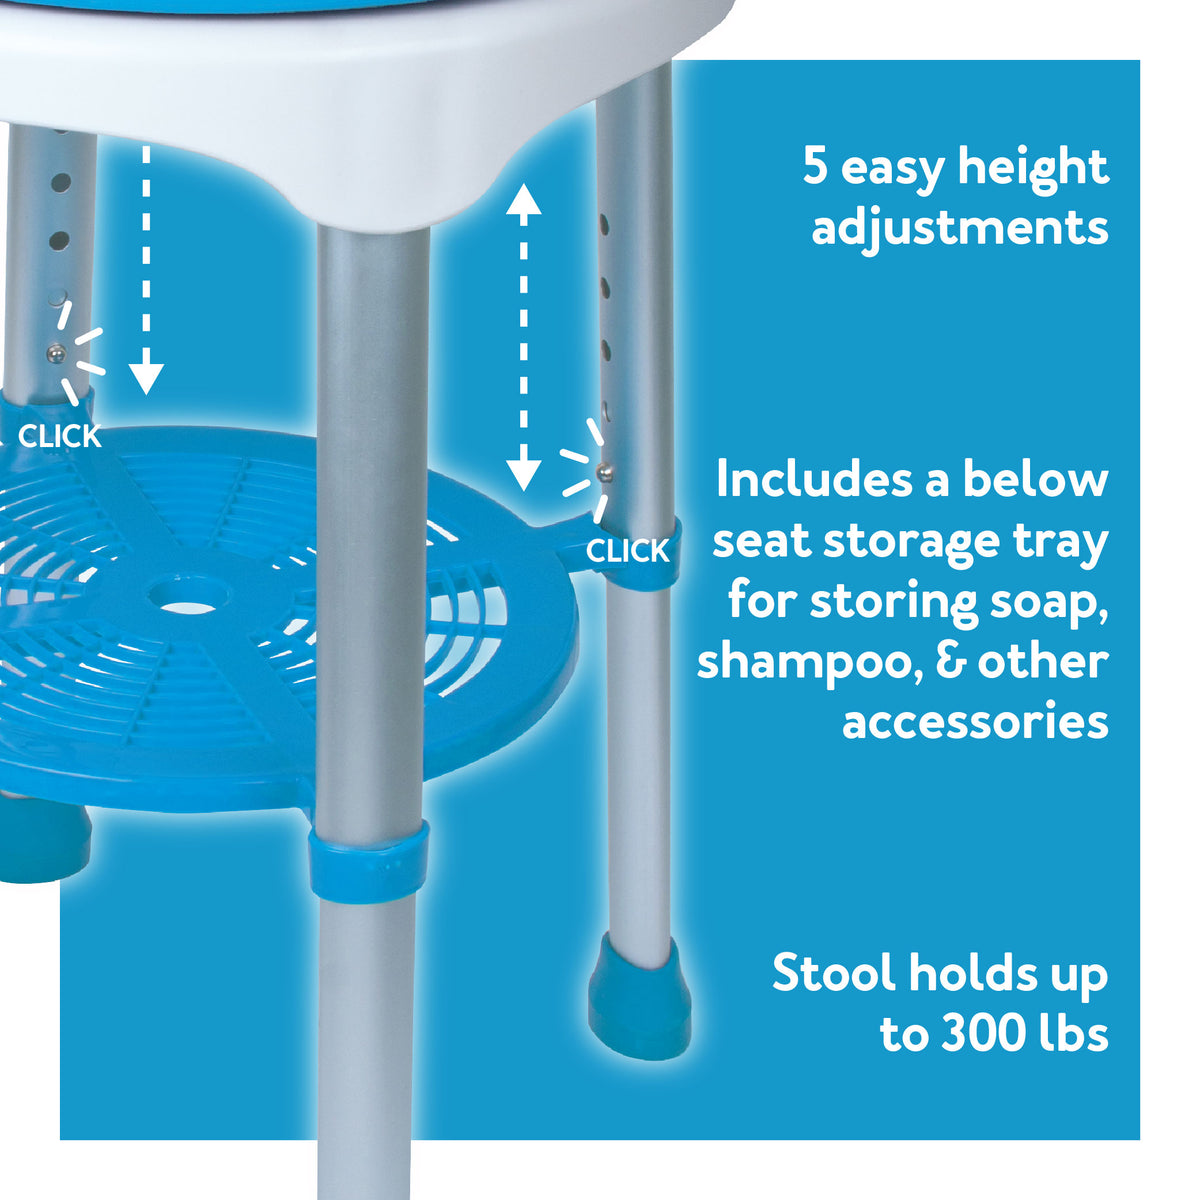 The Carex EZ Swivel Stool on a blue background : Further details are provided below